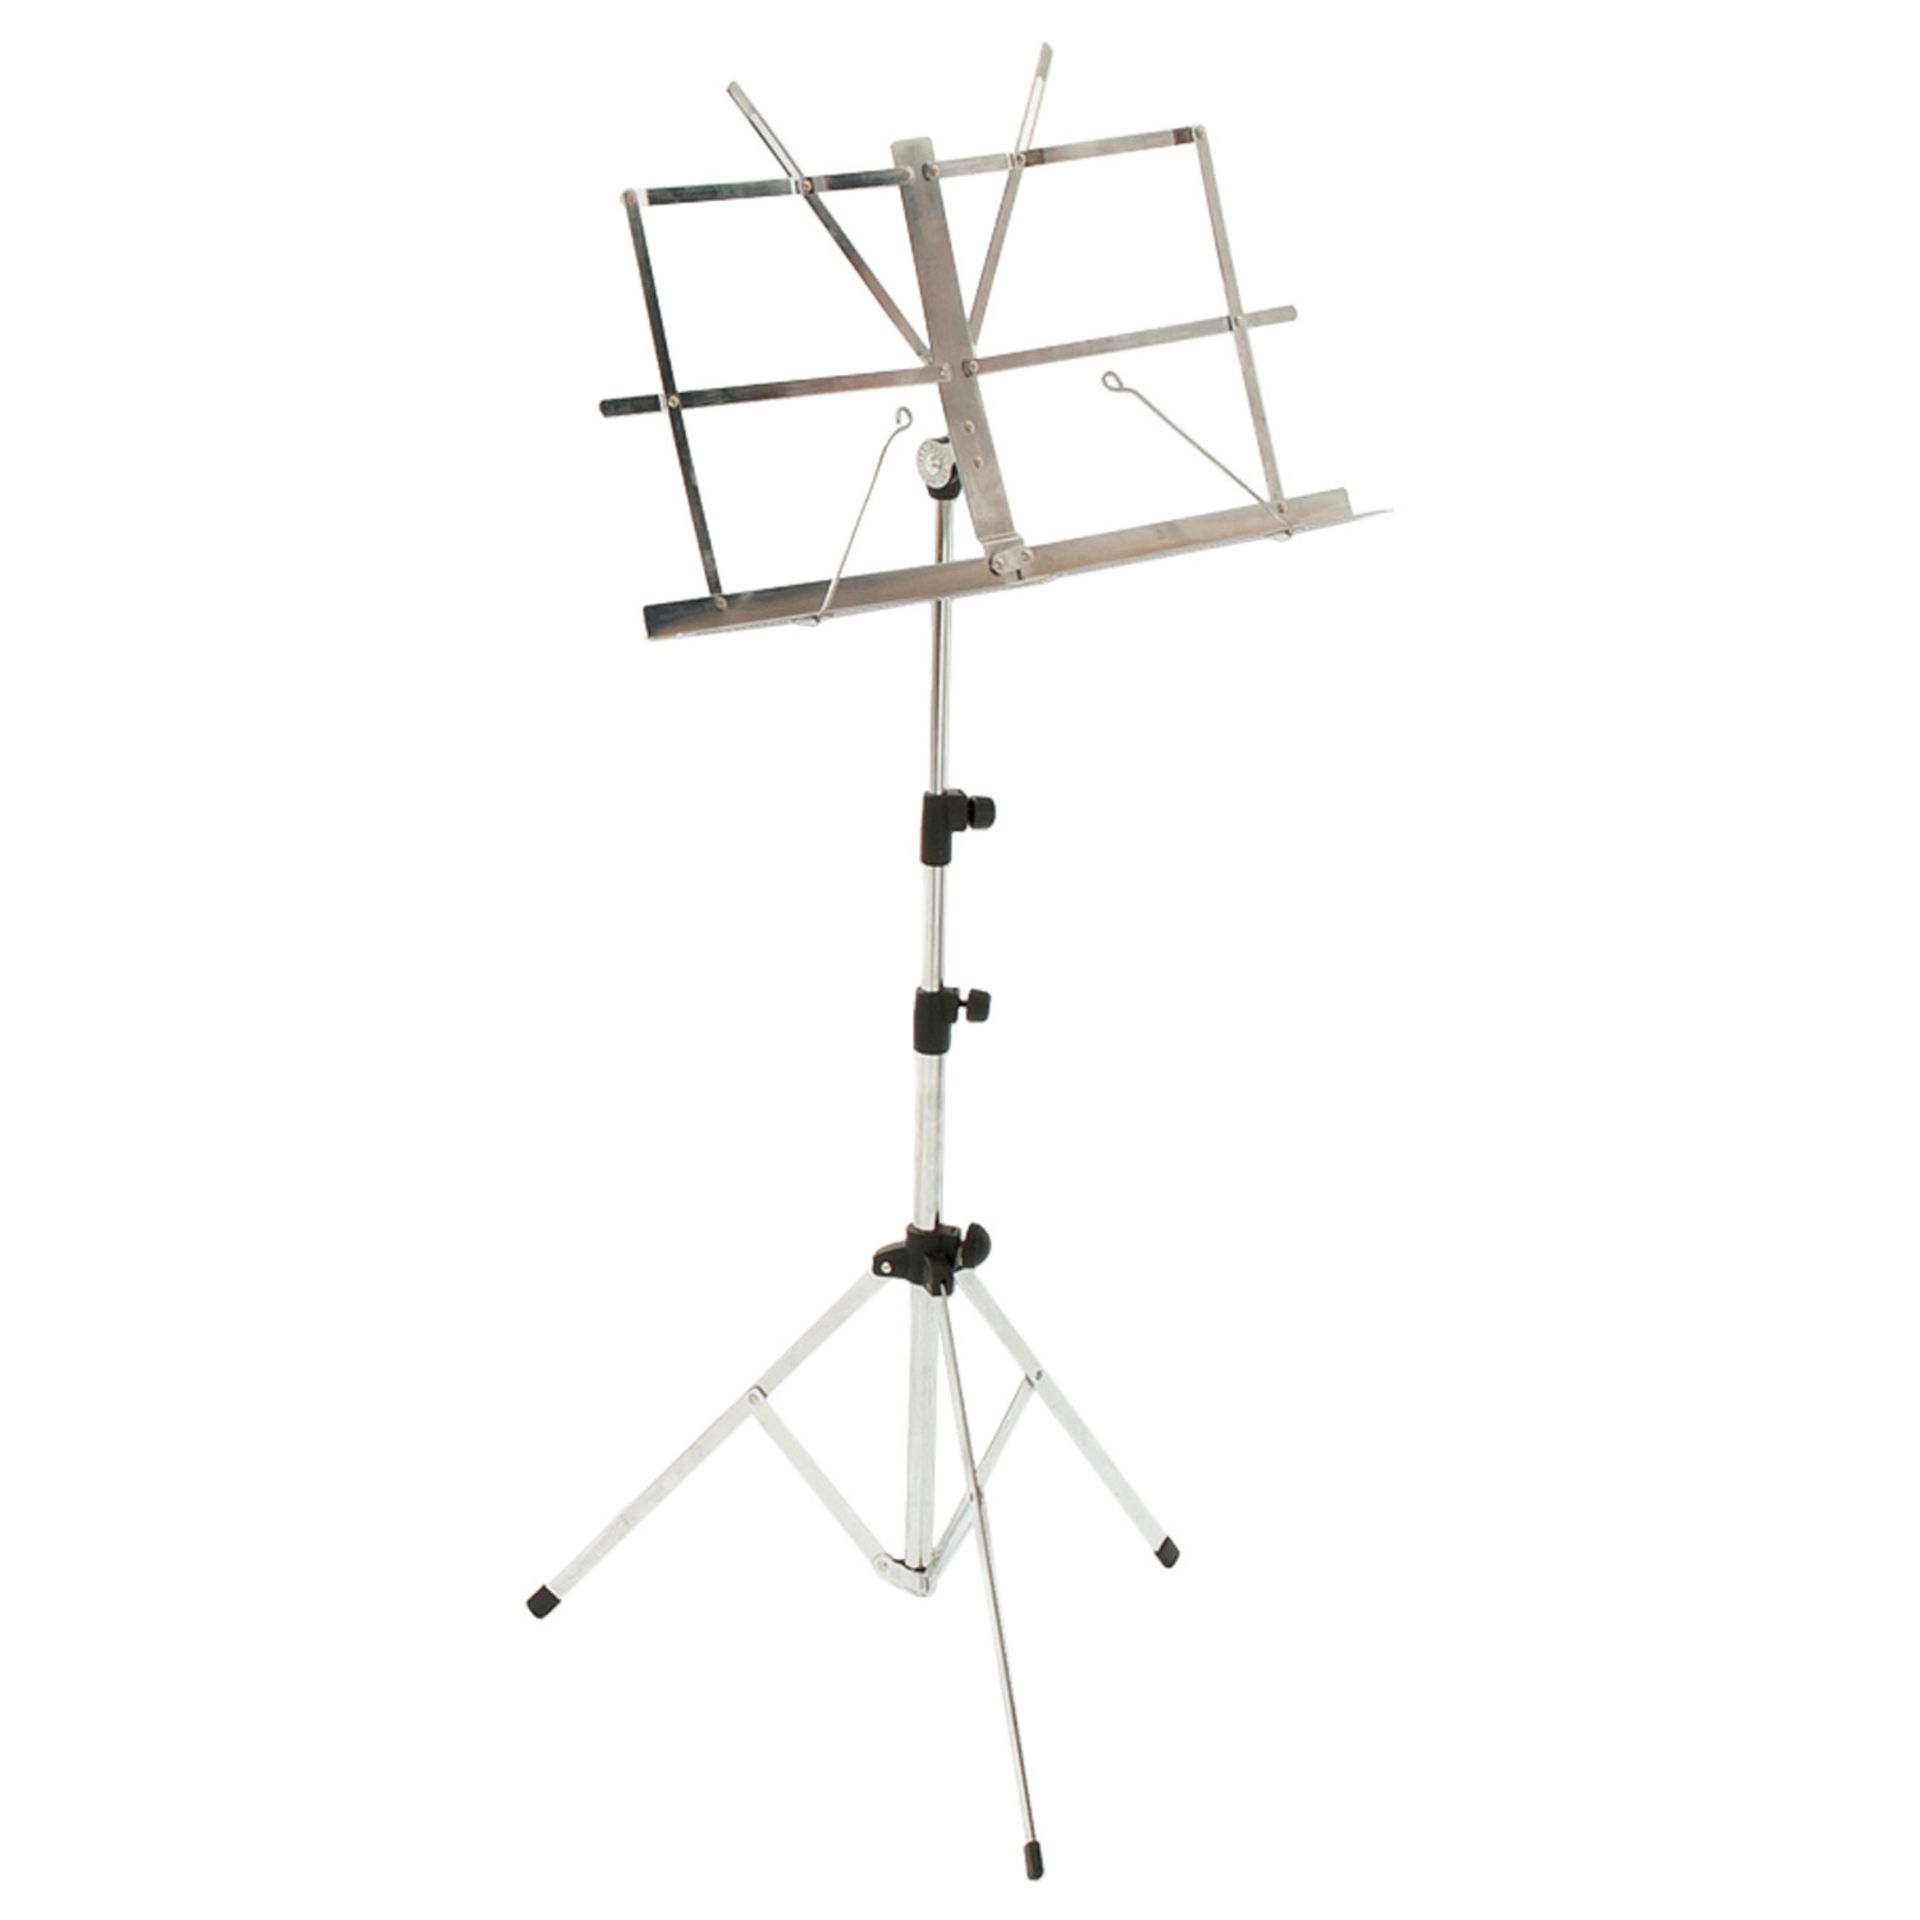 + VAT Brand New Music Stand Black (Image Similar To Item) ISP £16 (Percussion Company)